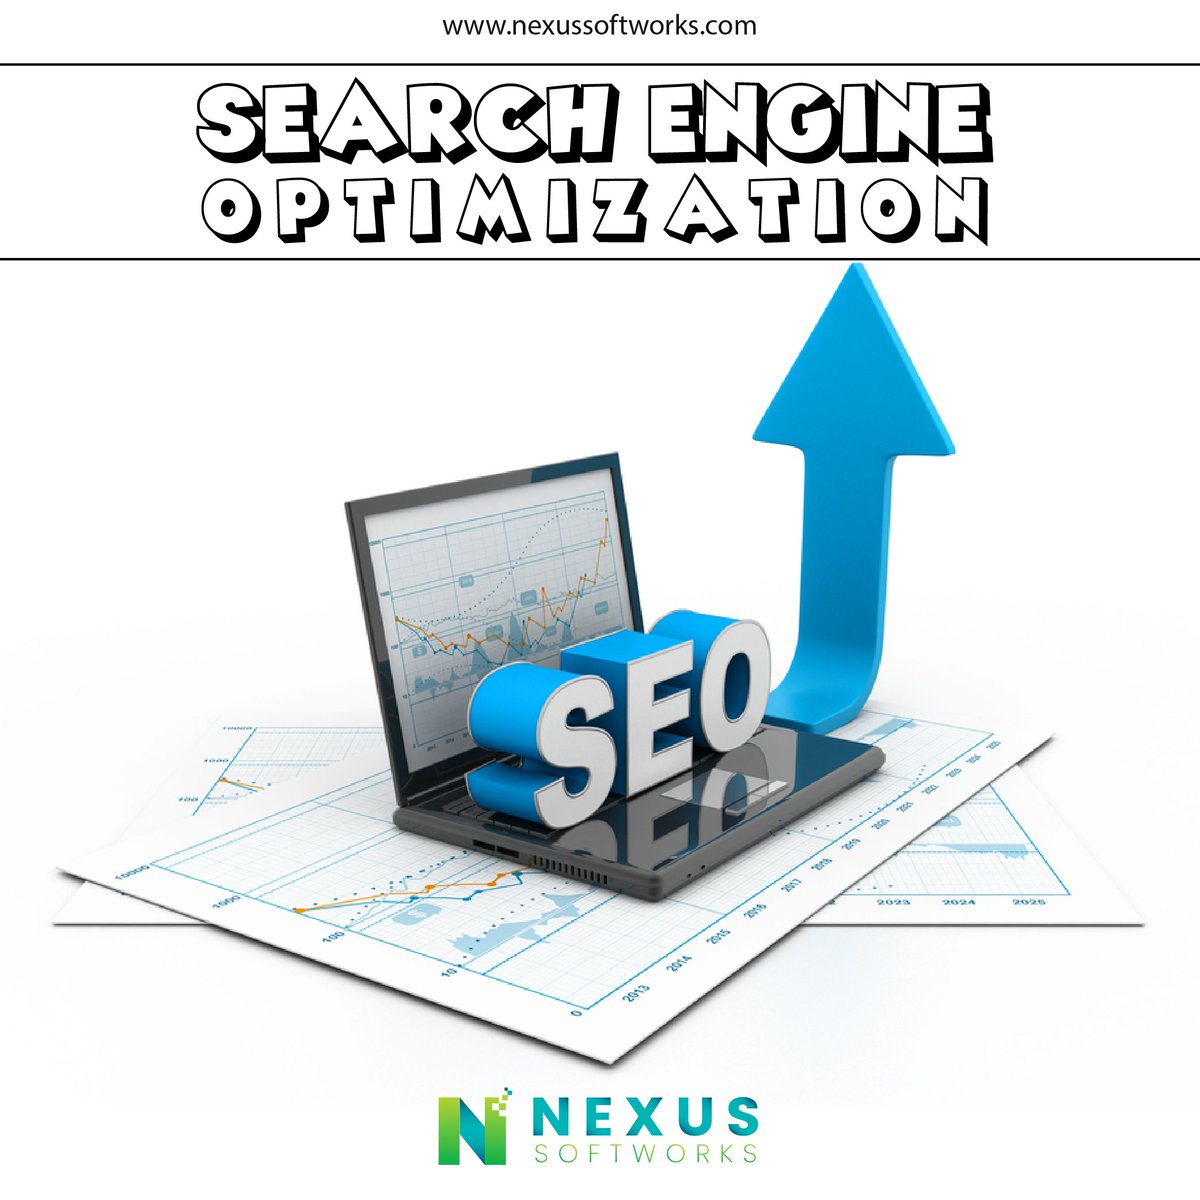 Navigate the digital landscape like a pro! Harness the potential of SEO to drive traffic and engagement.
.
.
#nexussoftworks #searchengineoptimization 📈 #DigitalStrategy #SEO 🖥🎯